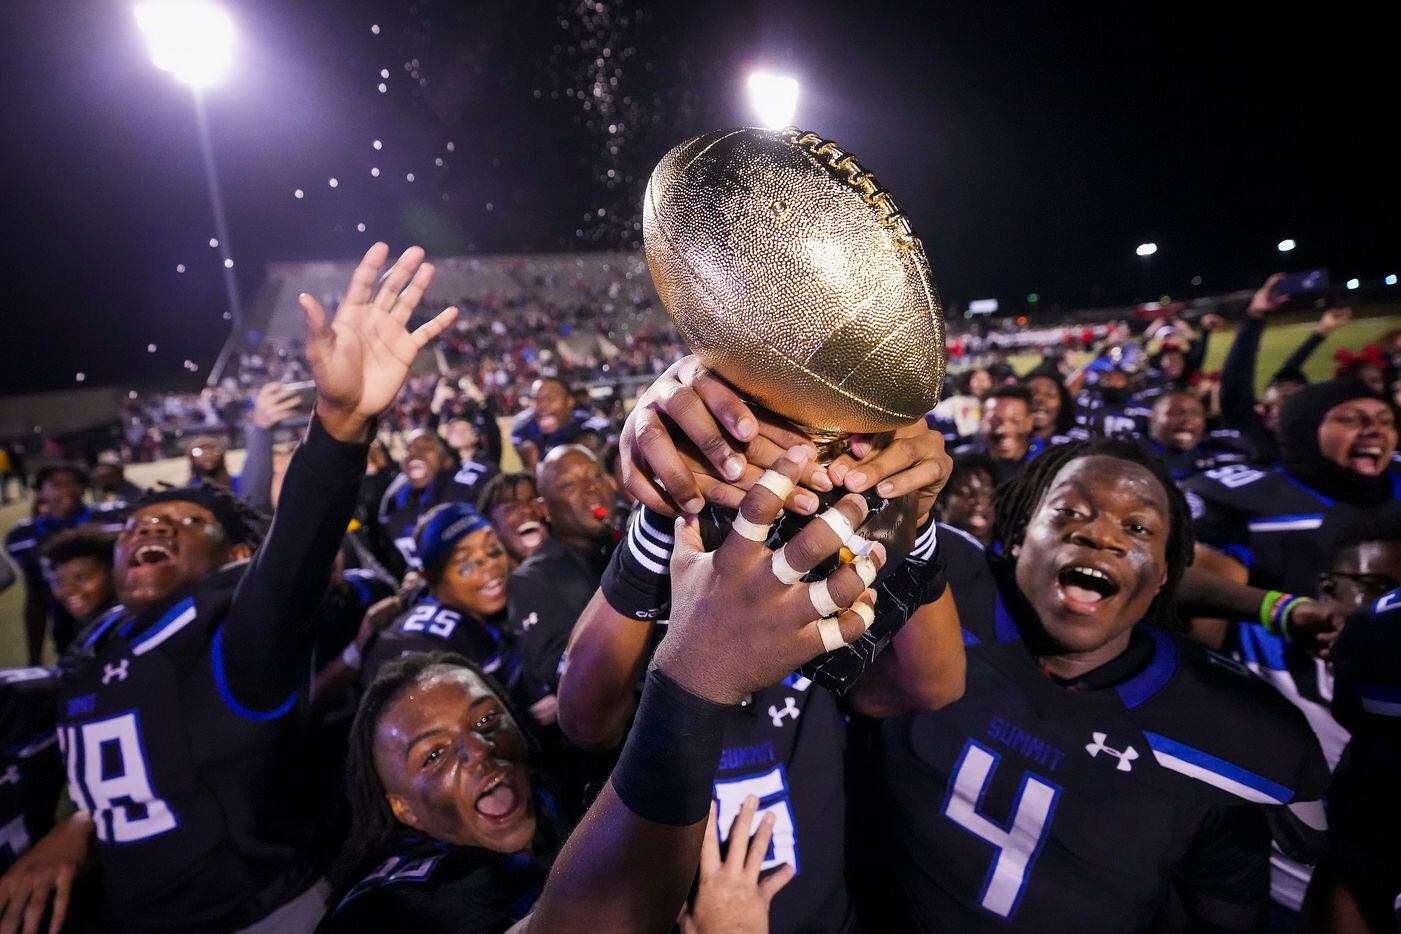 Mansfield Summit players celebrate with the game trophy after a victory over Colleyville Heritage in the Class 5A Division I Region I final on Friday, Dec. 3, 2021, in North Richland Hills, Texas. (Smiley N. Pool/The Dallas Morning News)